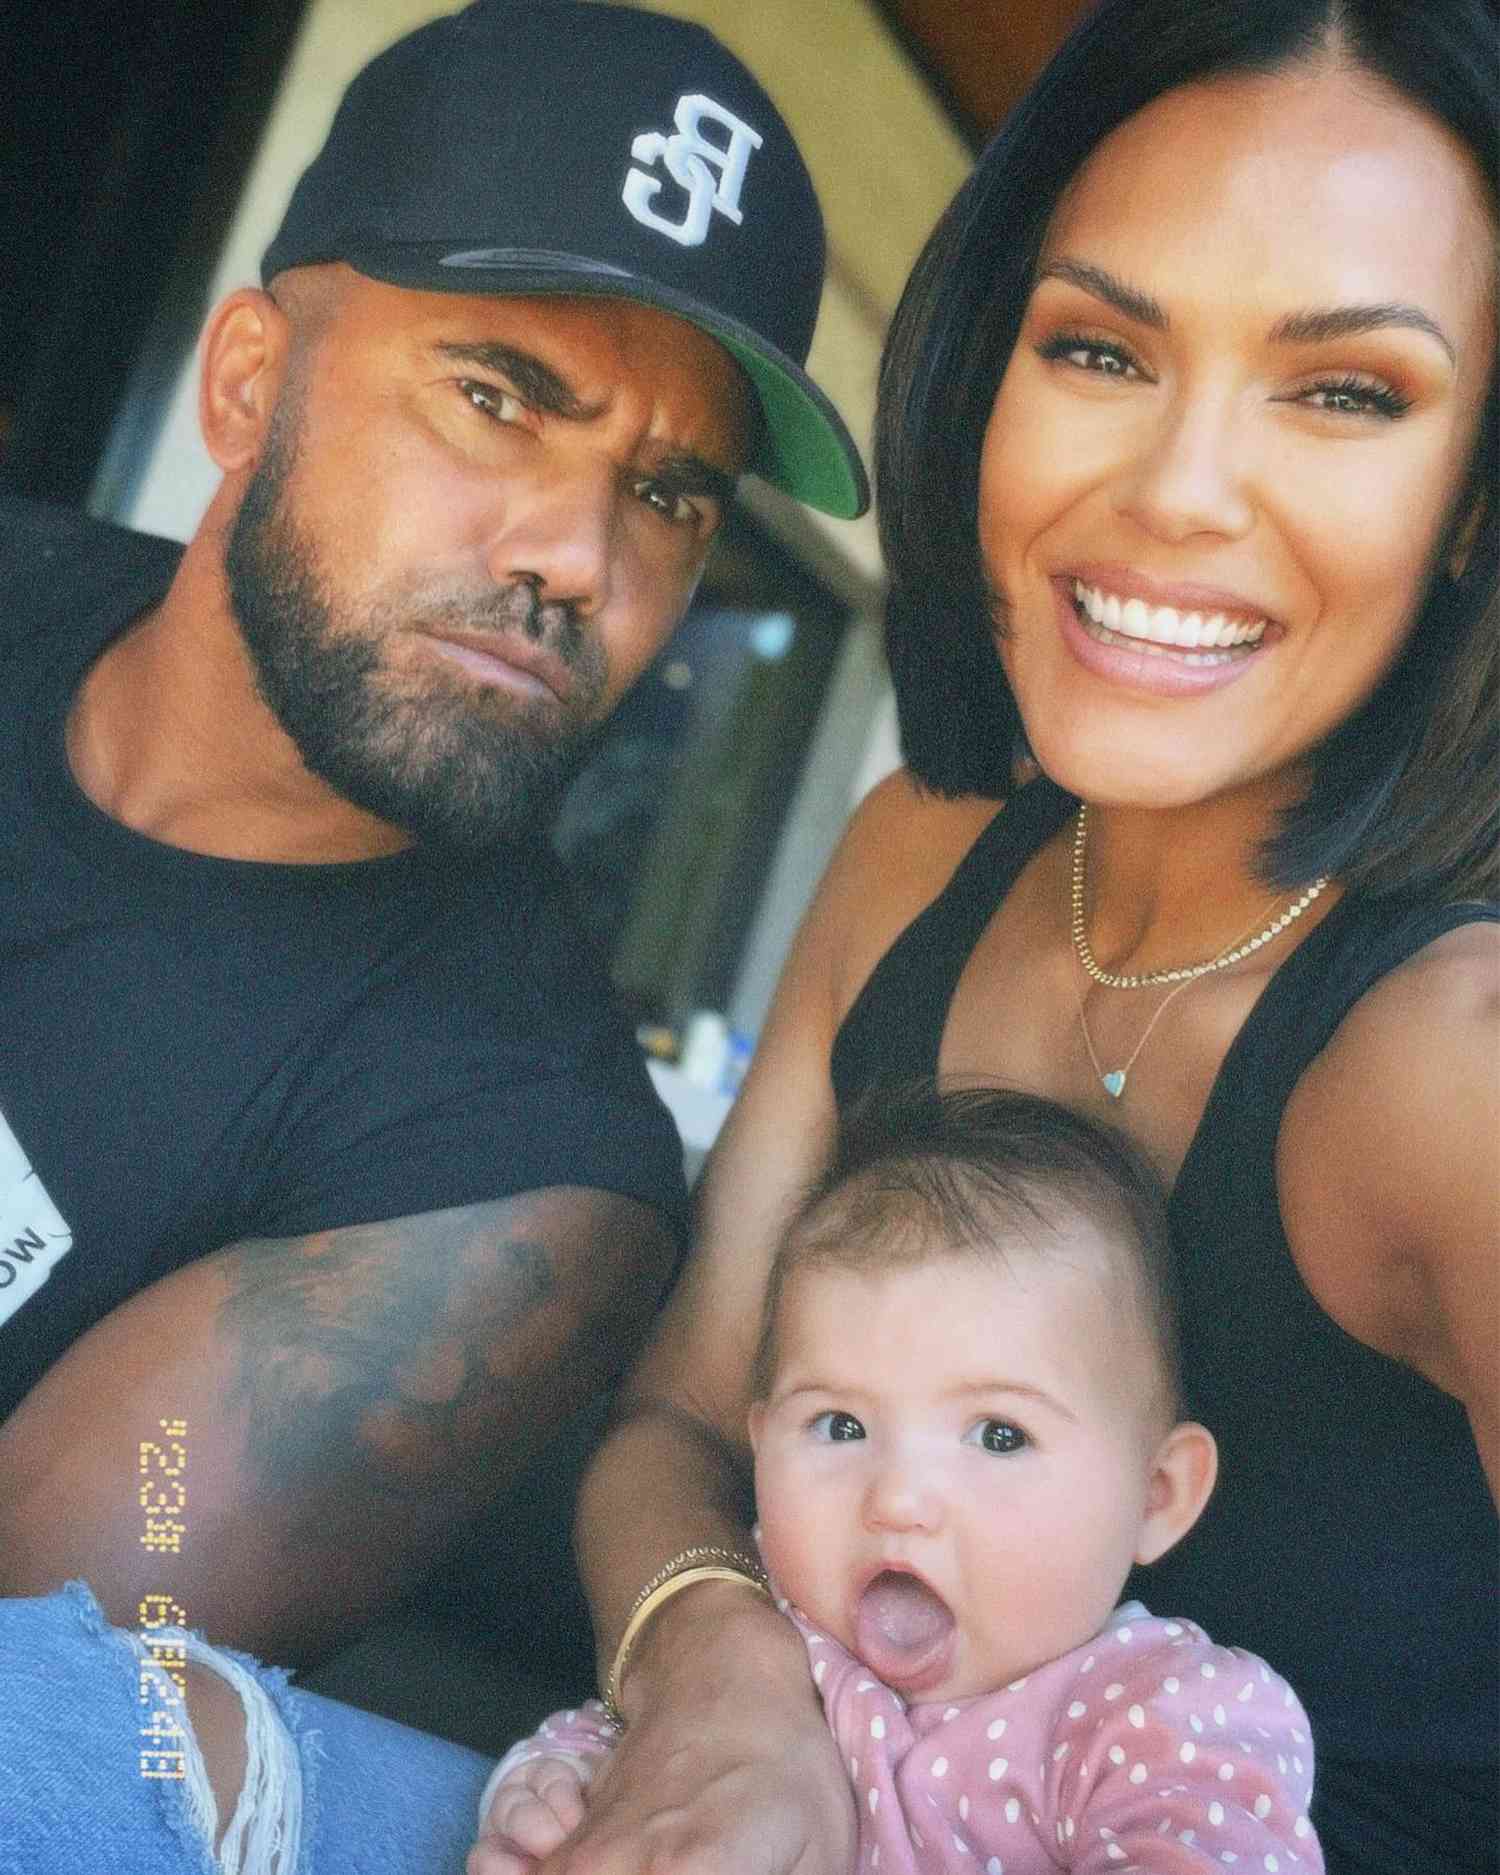 Shemar Moore and Jesiree Dizon with their daughter Frankie.